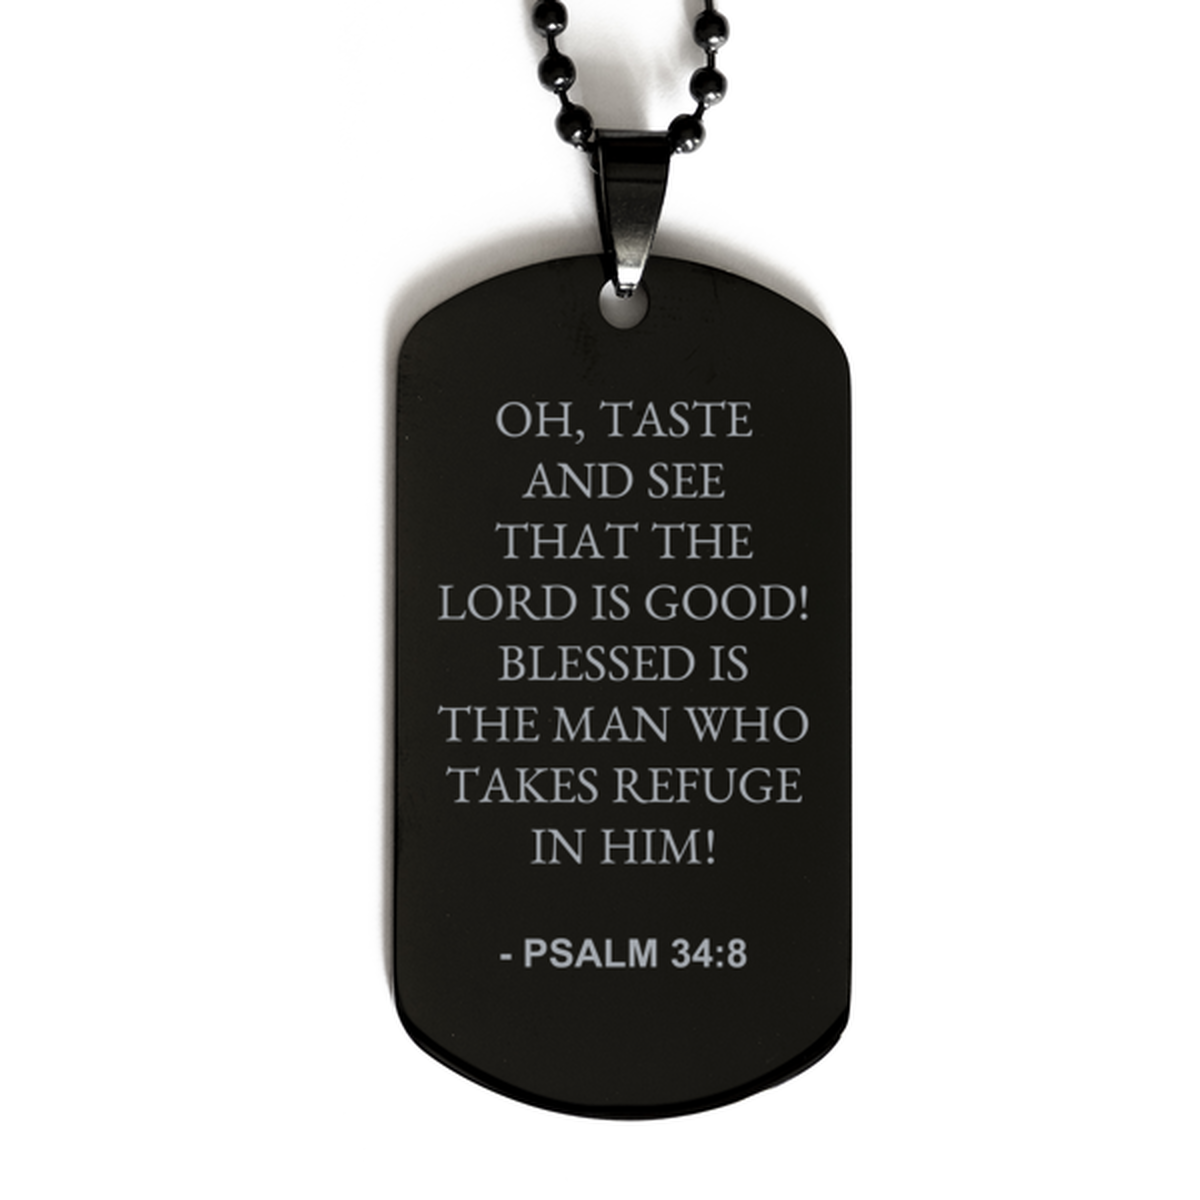 Bible Verse Black Dog Tag, Psalm 34:8 Oh, Taste And See That The Lord Is Good! Blessed, Christian Inspirational Necklace Gifts For Men Women